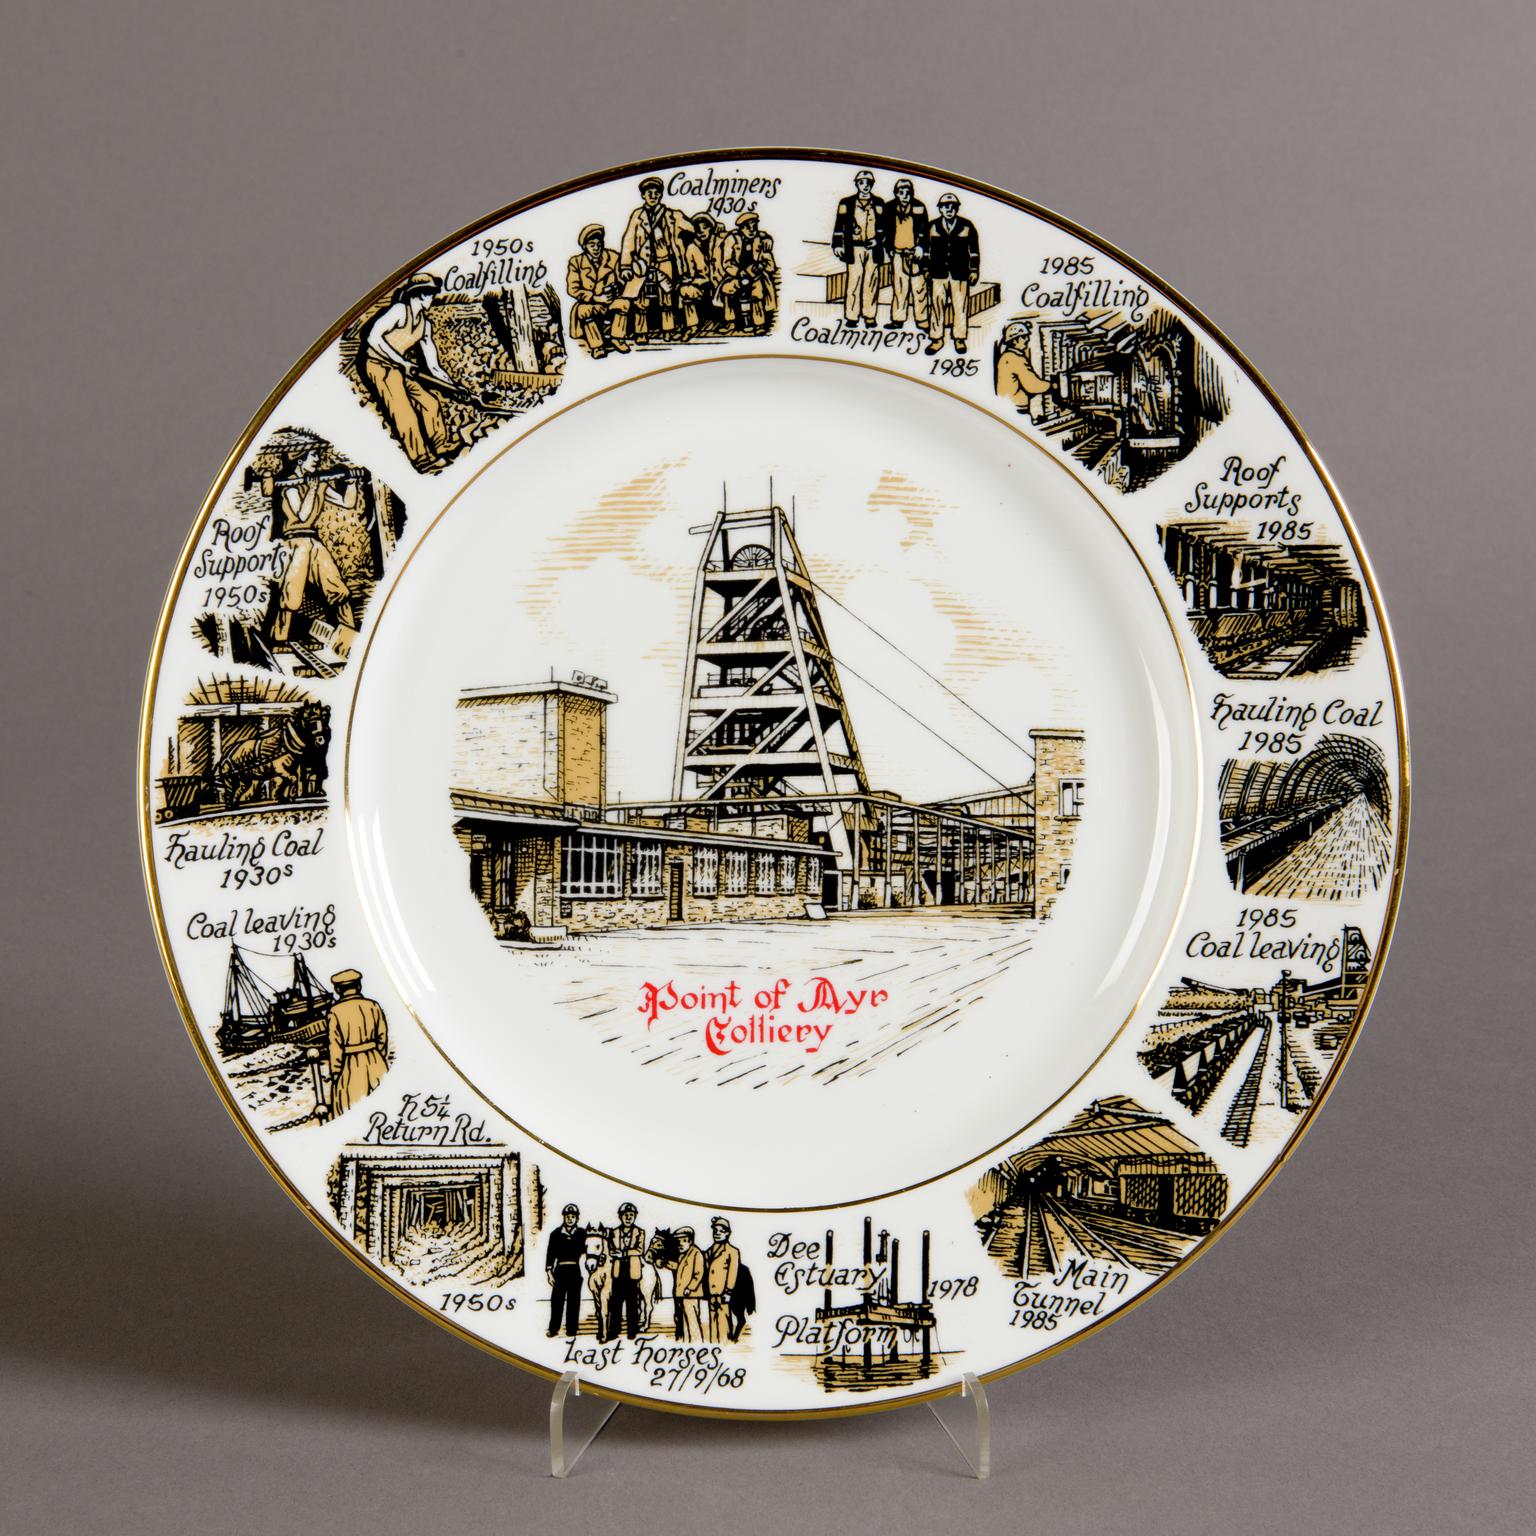 Point of Ayr Colliery, commemorative plate